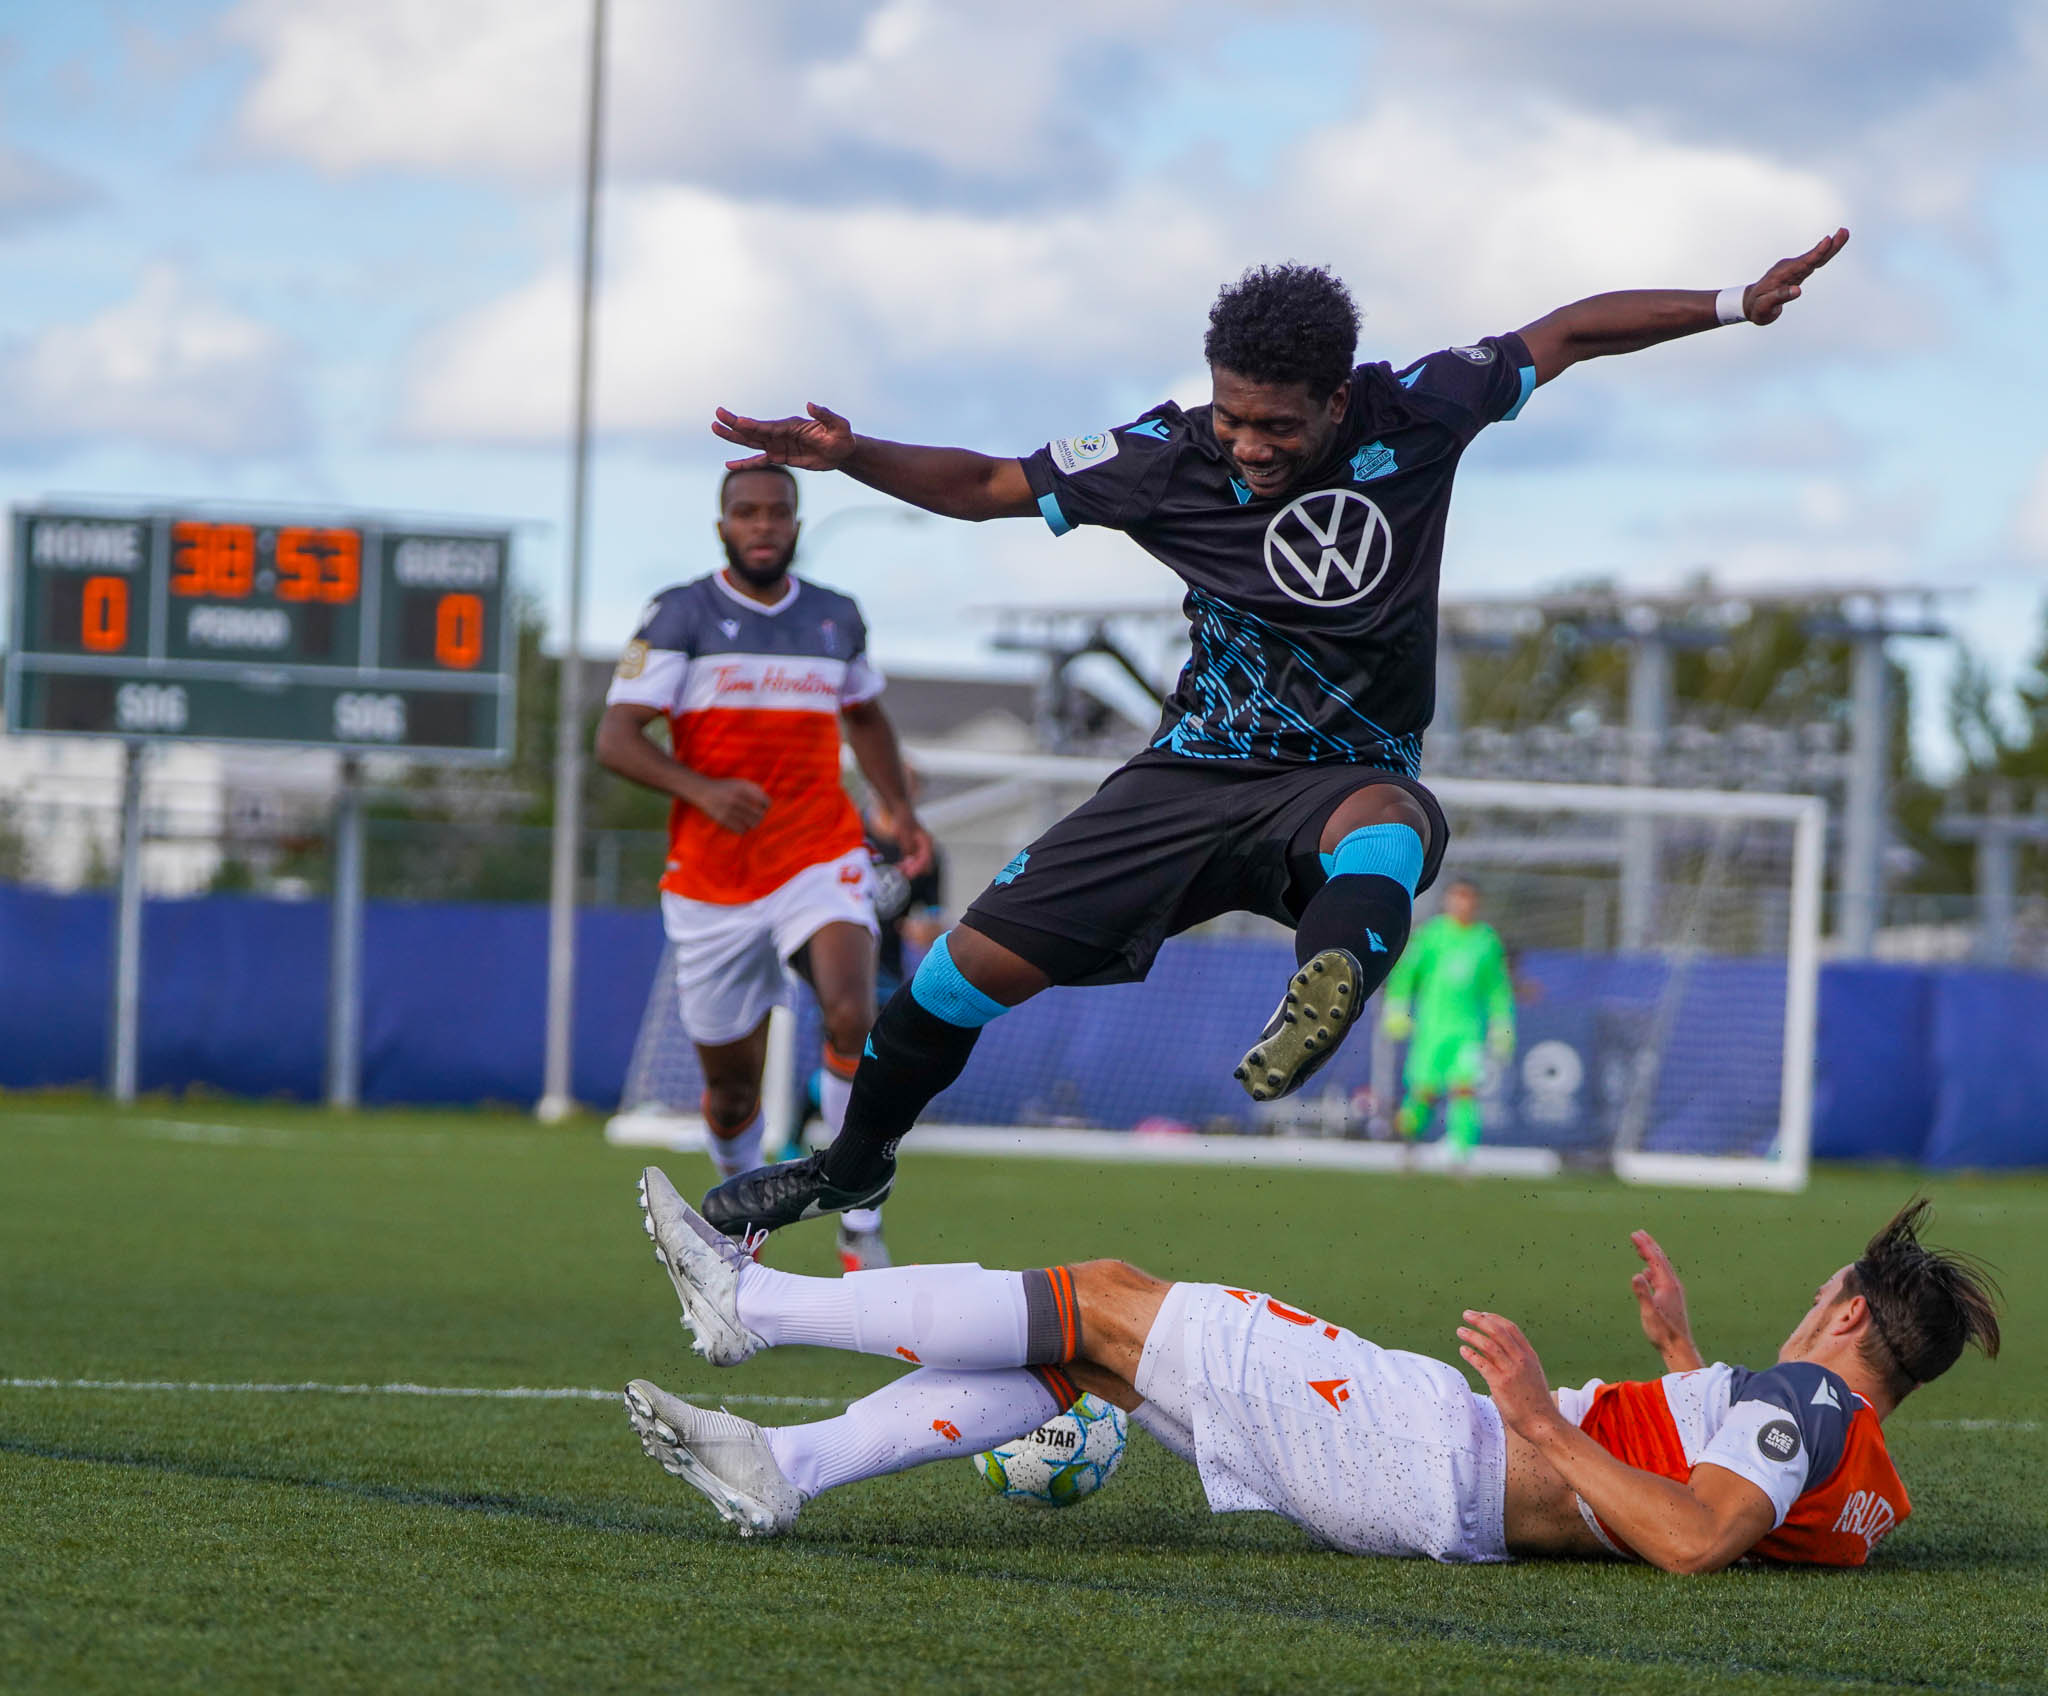 HFX Wanderers attacker Akeem Garcia evades a tackle from Forge FC's Daniel Krutzen. (CPL/Chant Photography)